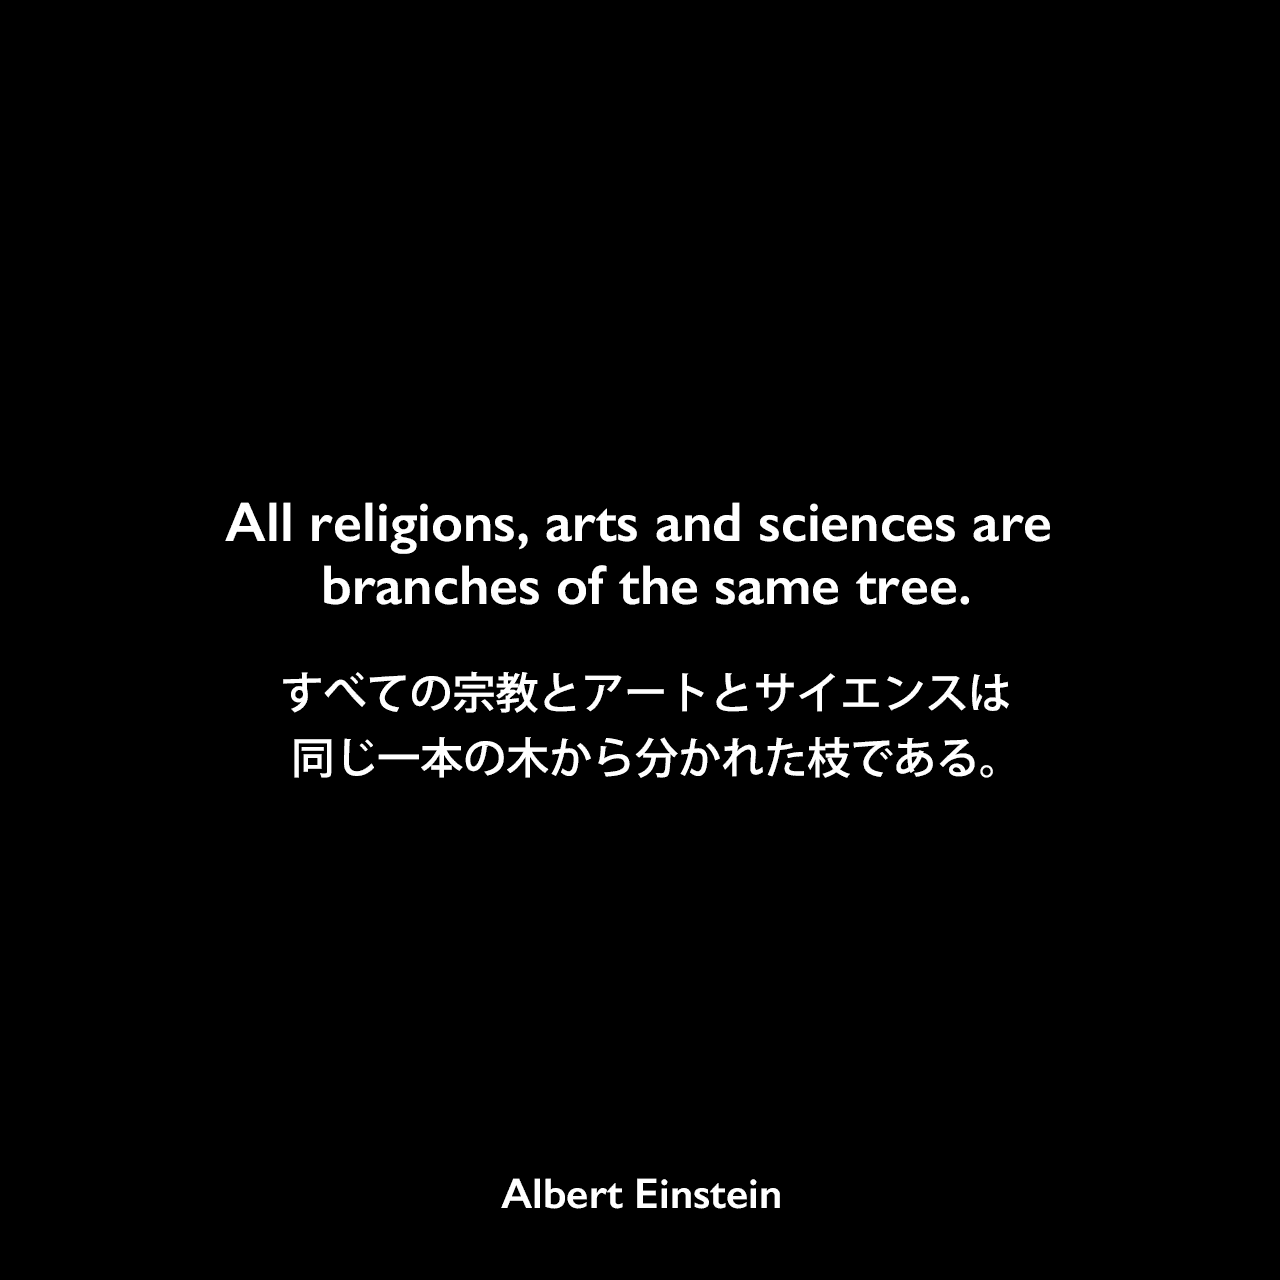 All religions, arts and sciences are branches of the same tree.すべての宗教とアートとサイエンスは、同じ一本の木から分かれた枝である。- アインシュタインによる本「Out of My Later Years」（1950年）よりAlbert Einstein